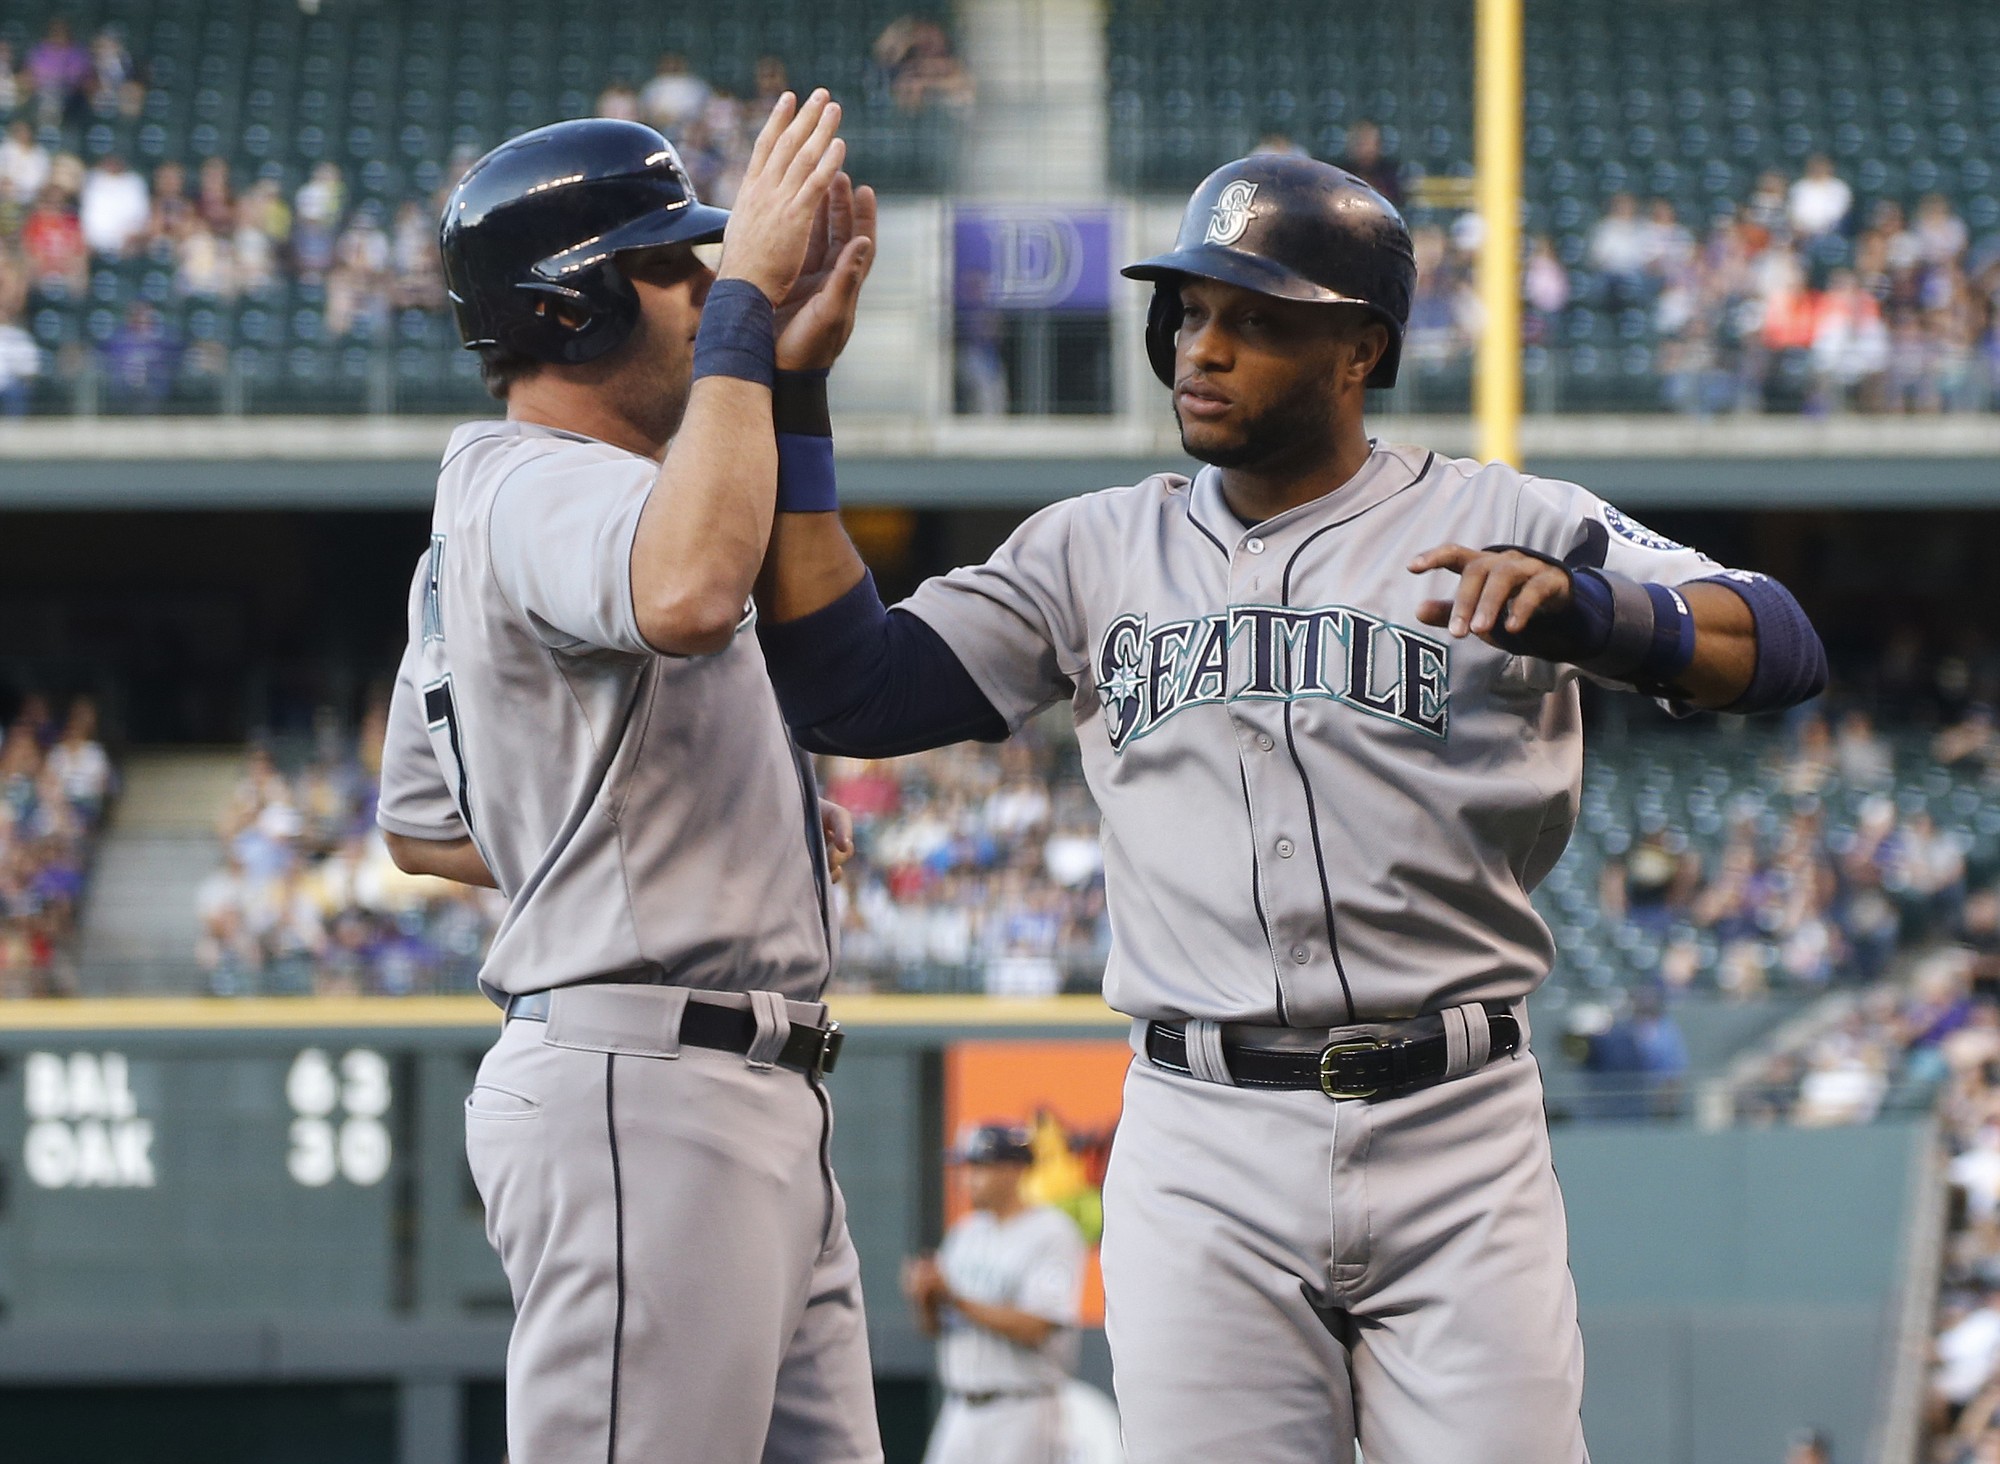 Seattle Mariners' Seth Smith, left, is congratulated by Robinson Cano after they scored on a double by Jesus Montero against the Colorado Rockies in the first inning Monday, Aug. 3, 2015, in Denver.